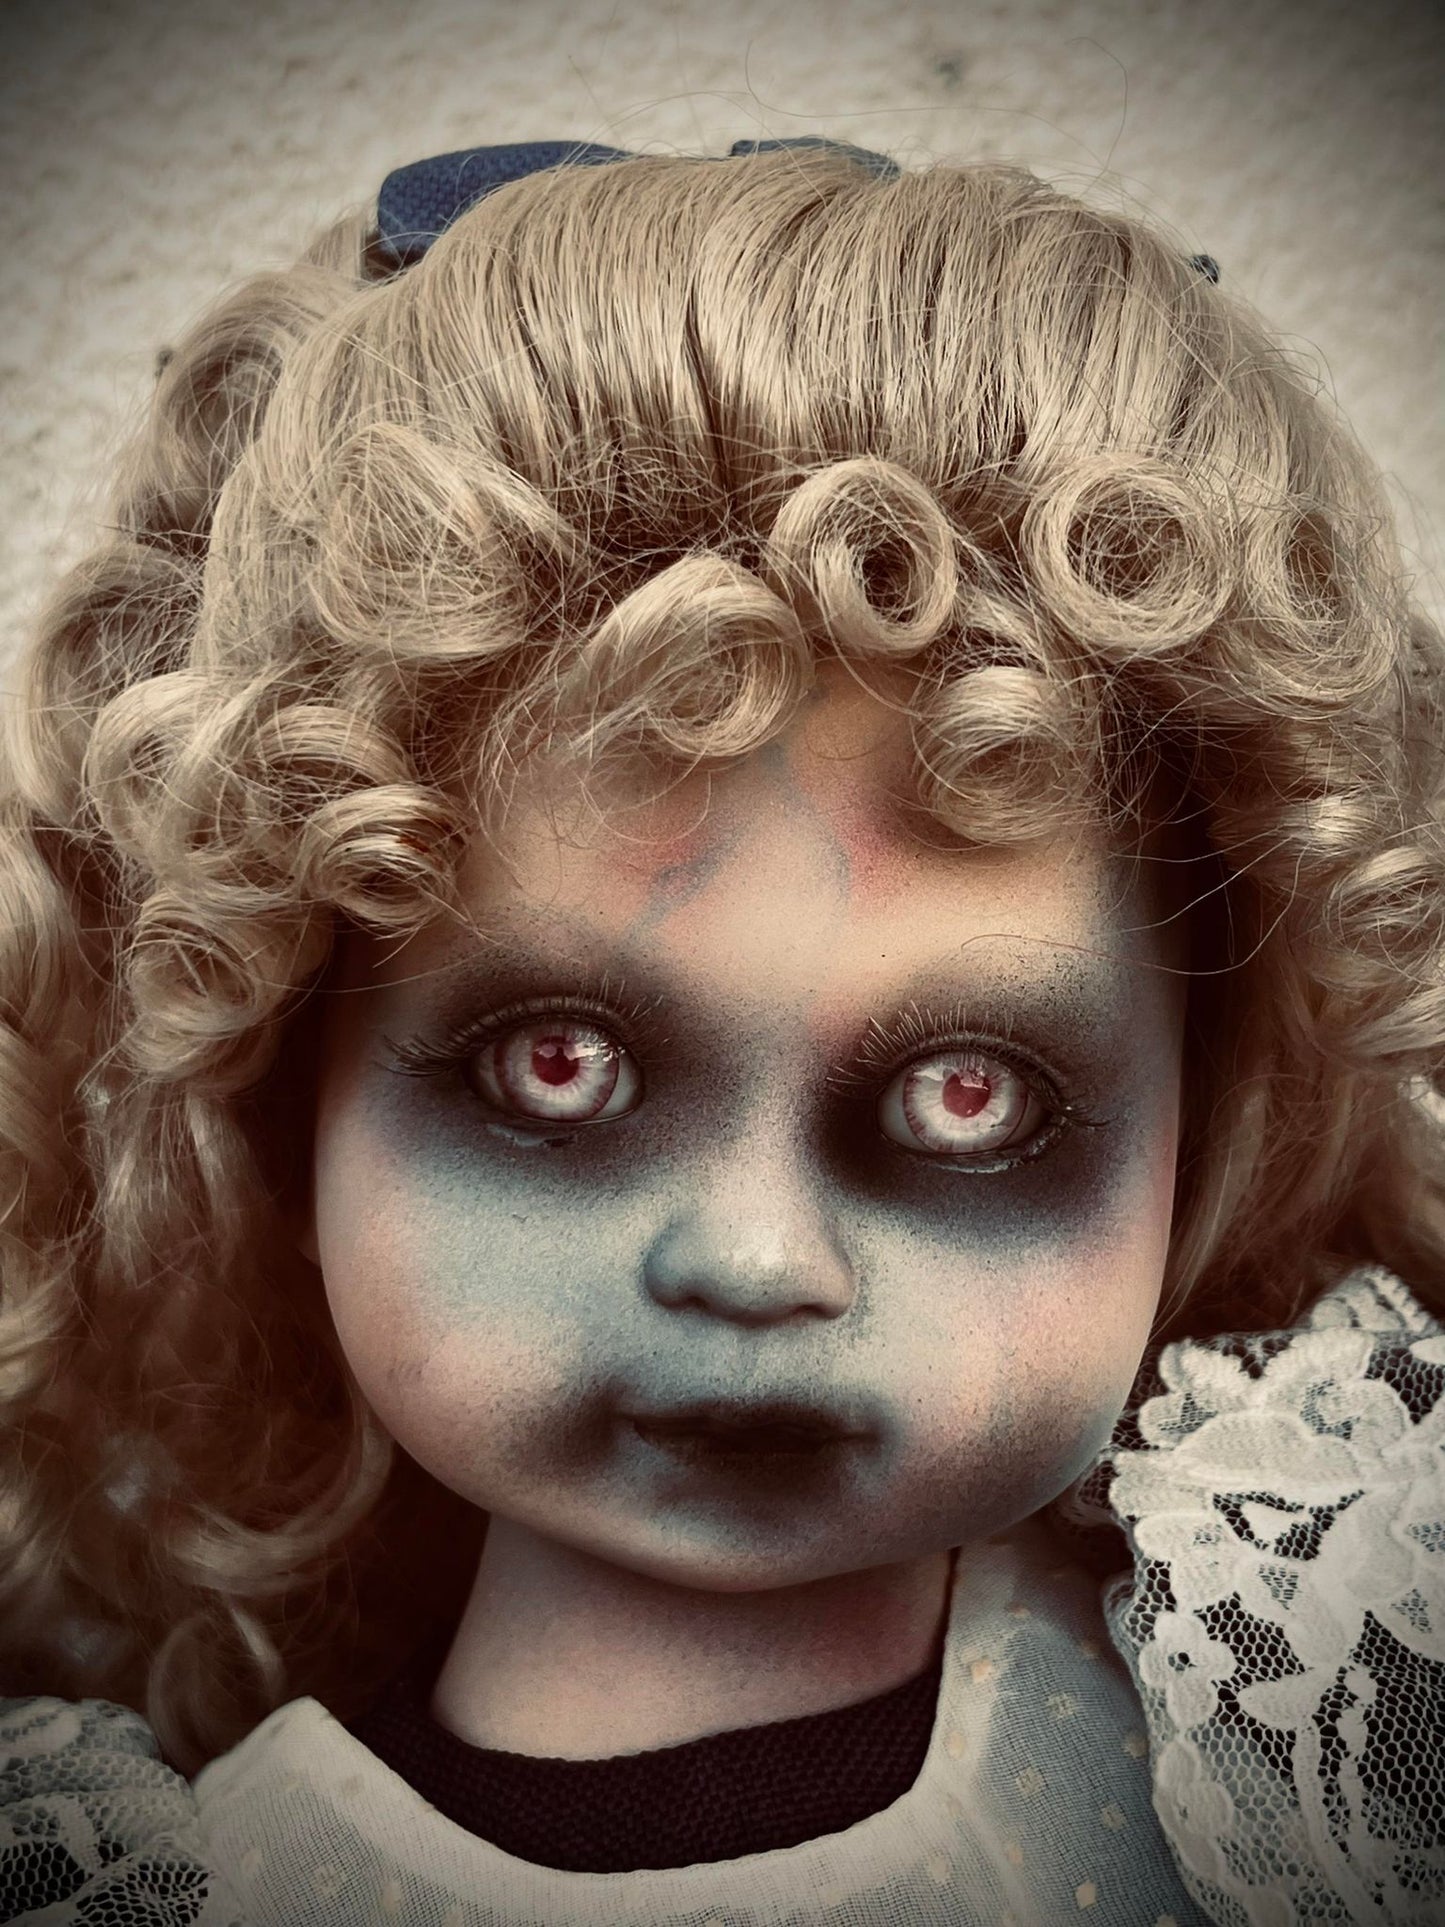 Meet Lily 18" Doll Porcelain Zombie Undead Witchy Creepy Haunted Spirit Infected Scary Spooky Possessed Positive Oddity Gift Idea